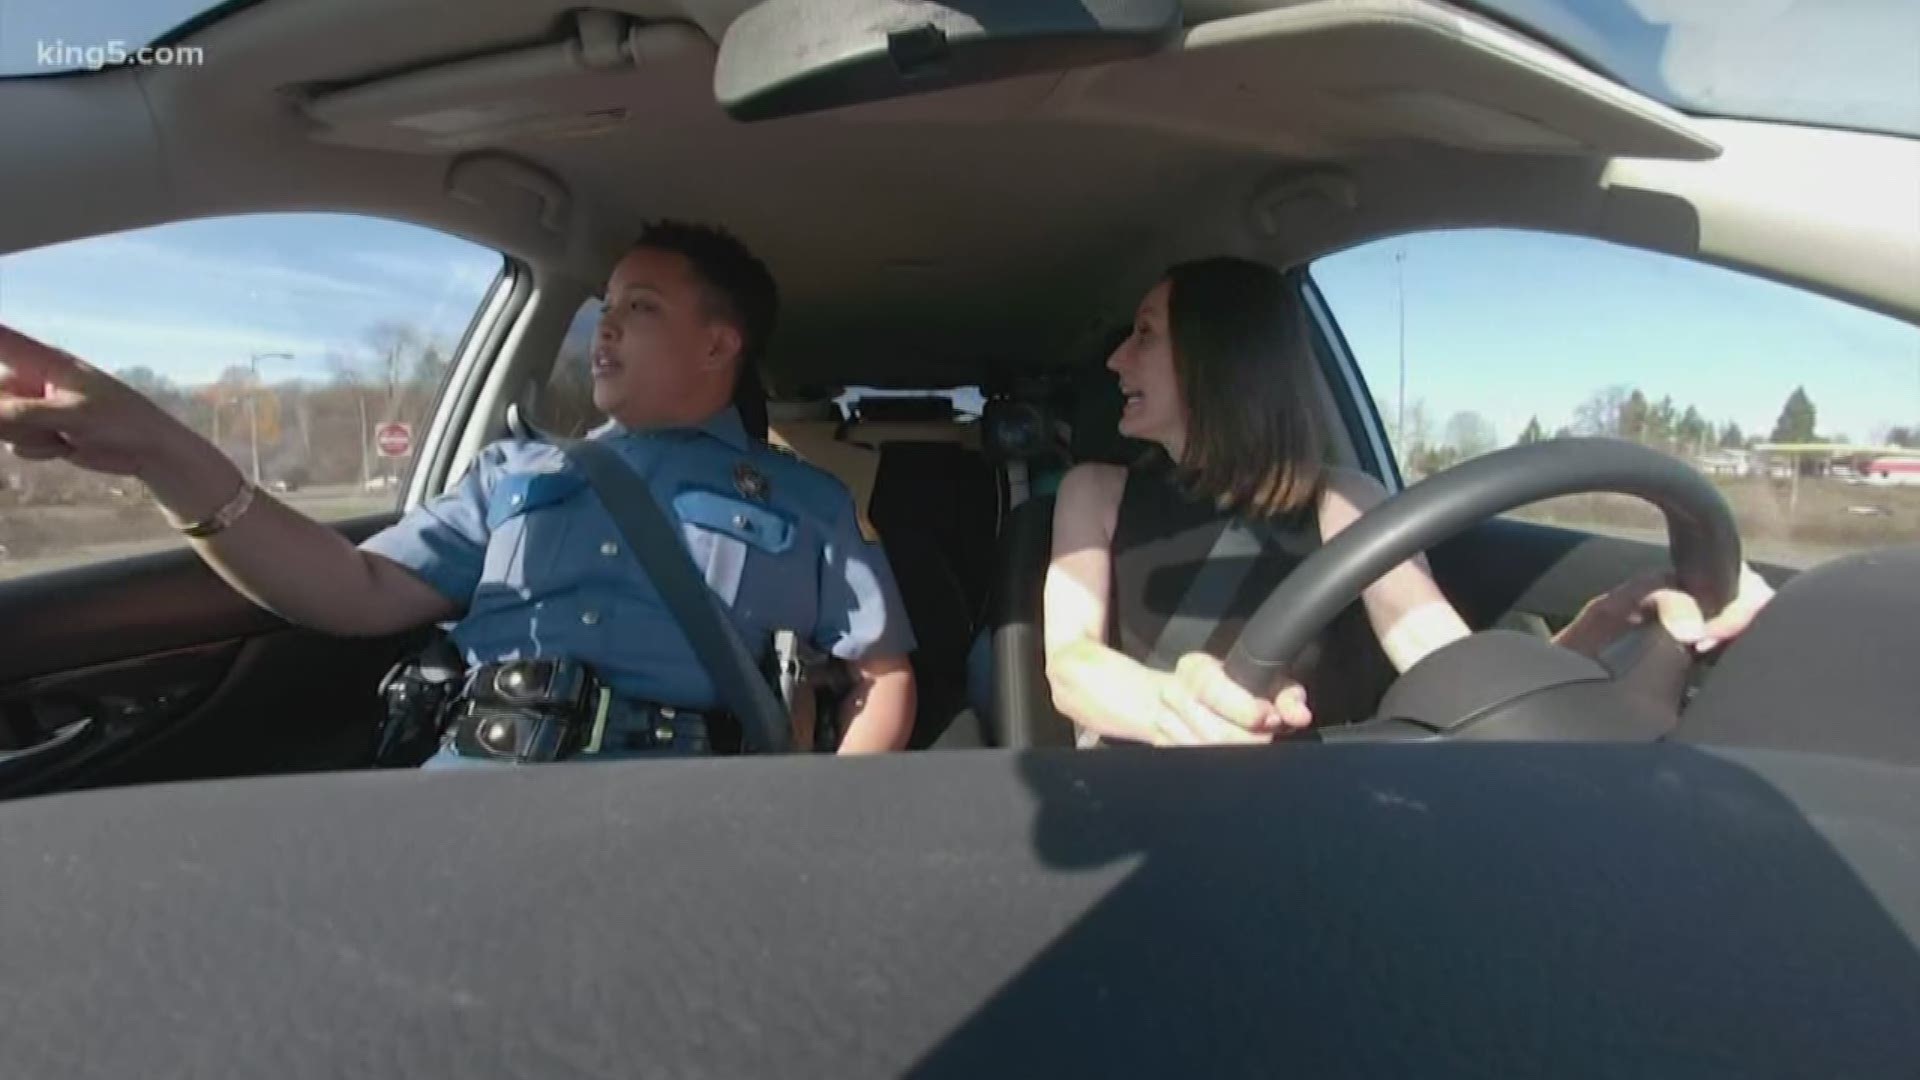 Driving can cause a lot of stress, especially when we're all stuck in traffic. Sometimes a little politeness can go a long way, except, it turns out, when it comes to zipper merging. We enlisted the help of an old friend and expert with the Washington State Patrol to get us all on the same merging page.